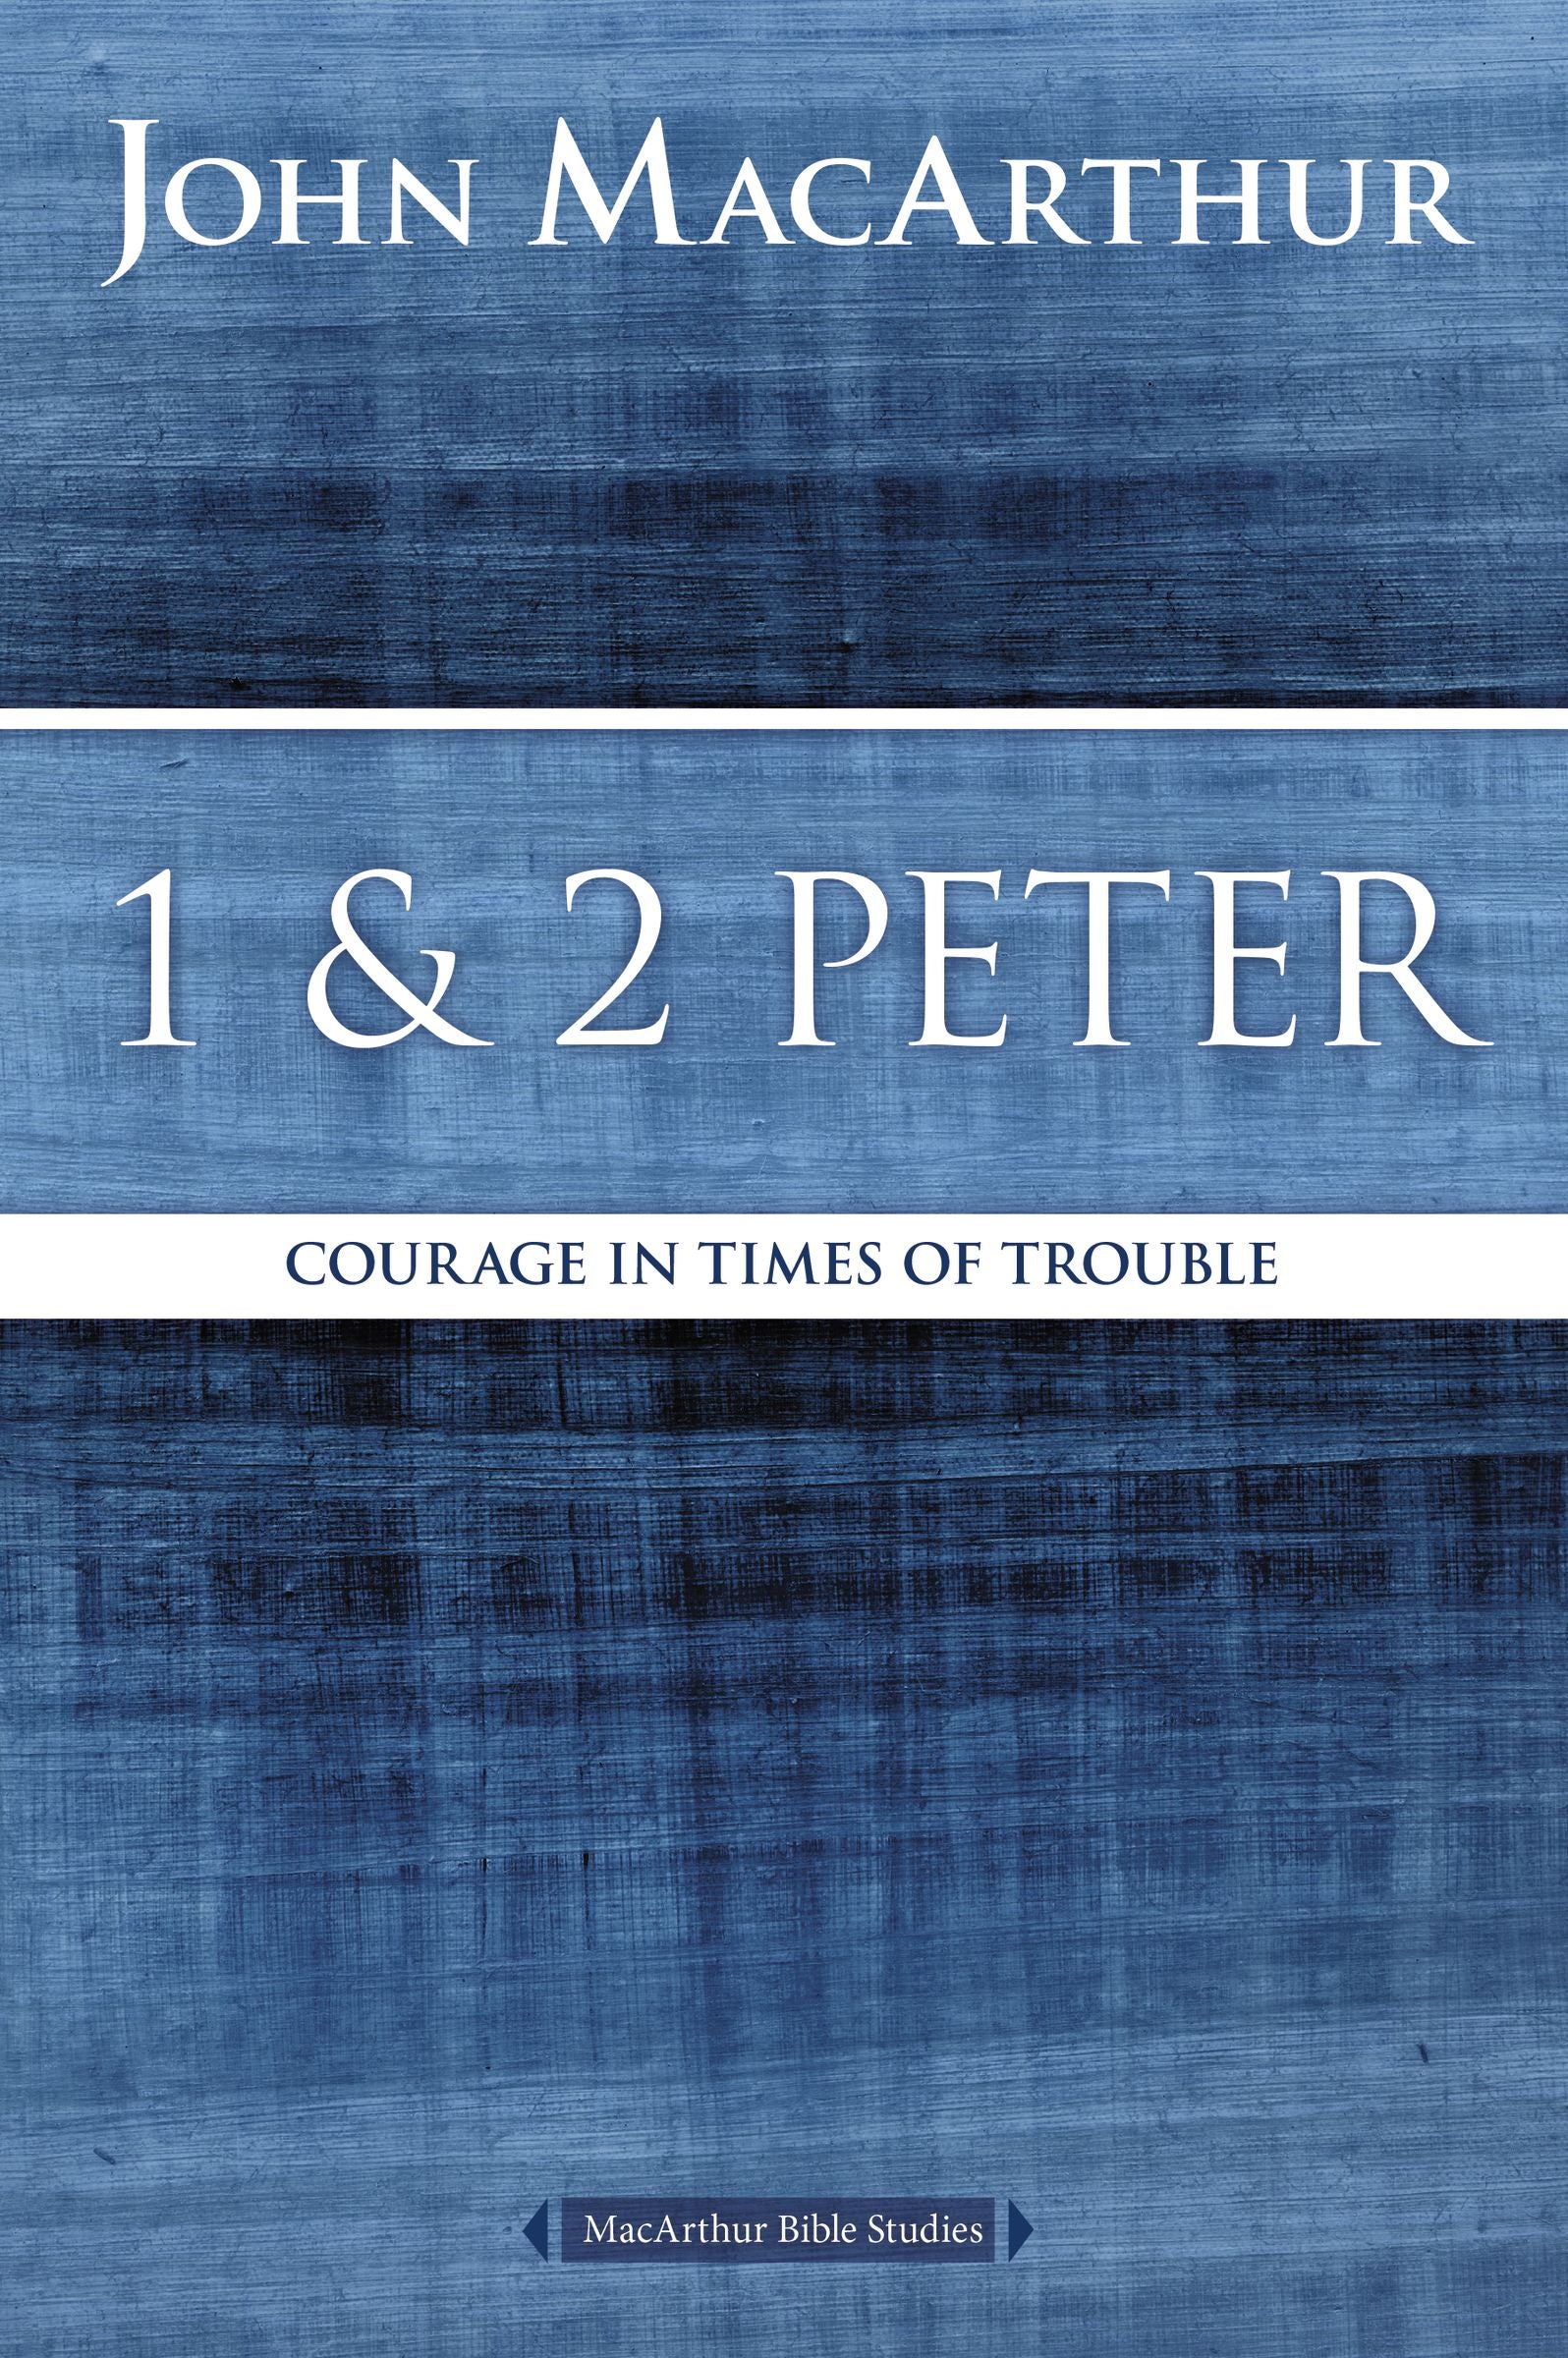 Image of 1 and 2 Peter other